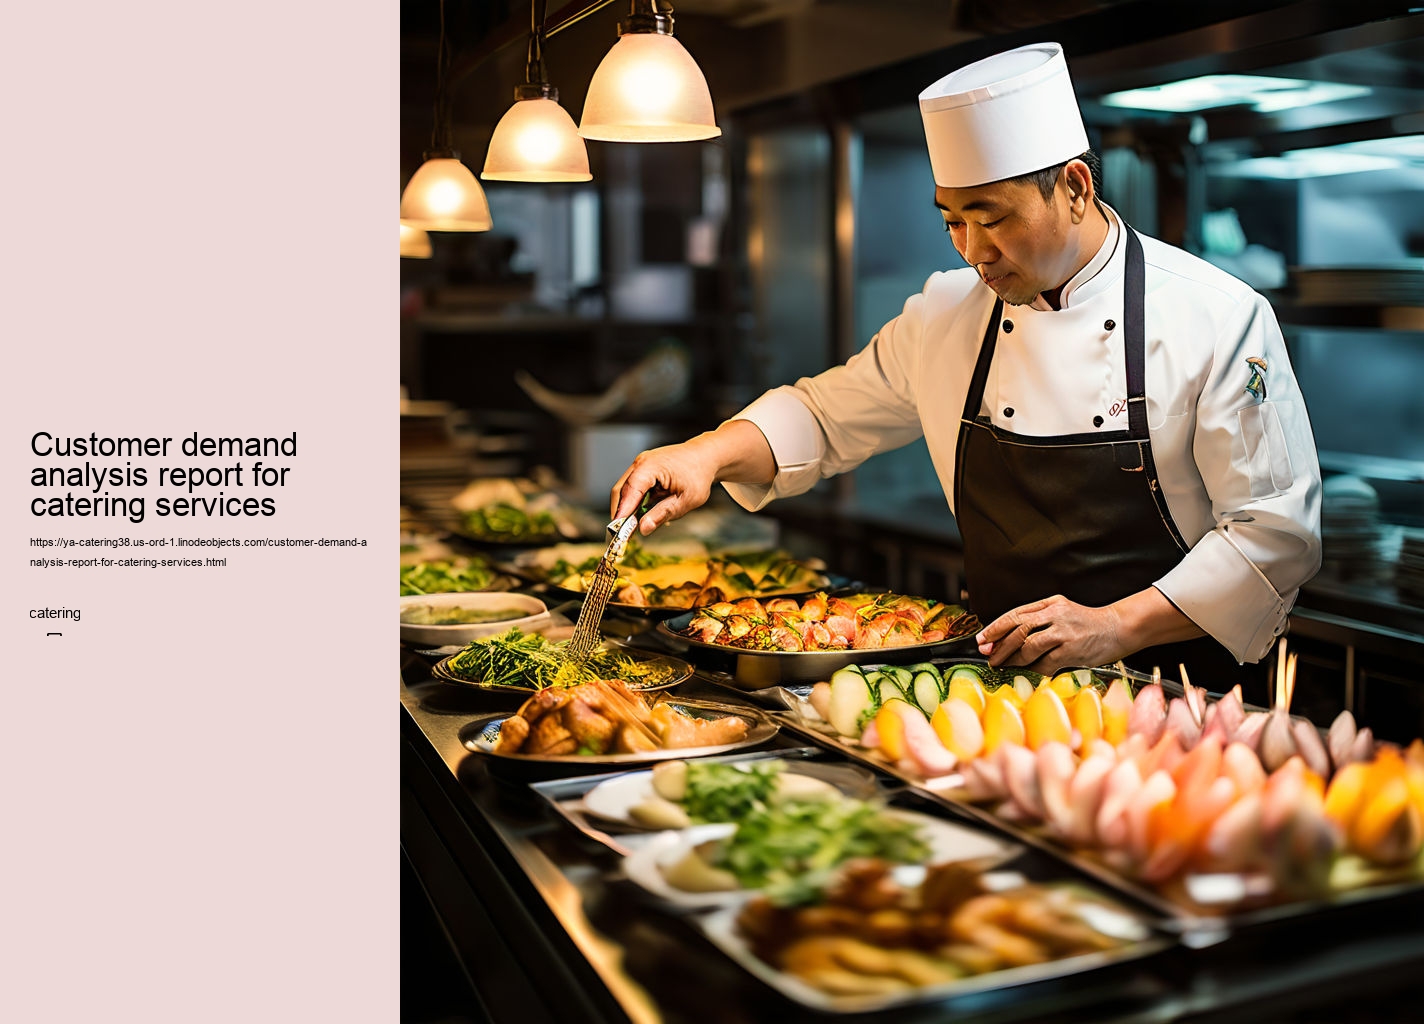 Customer demand analysis report for catering services